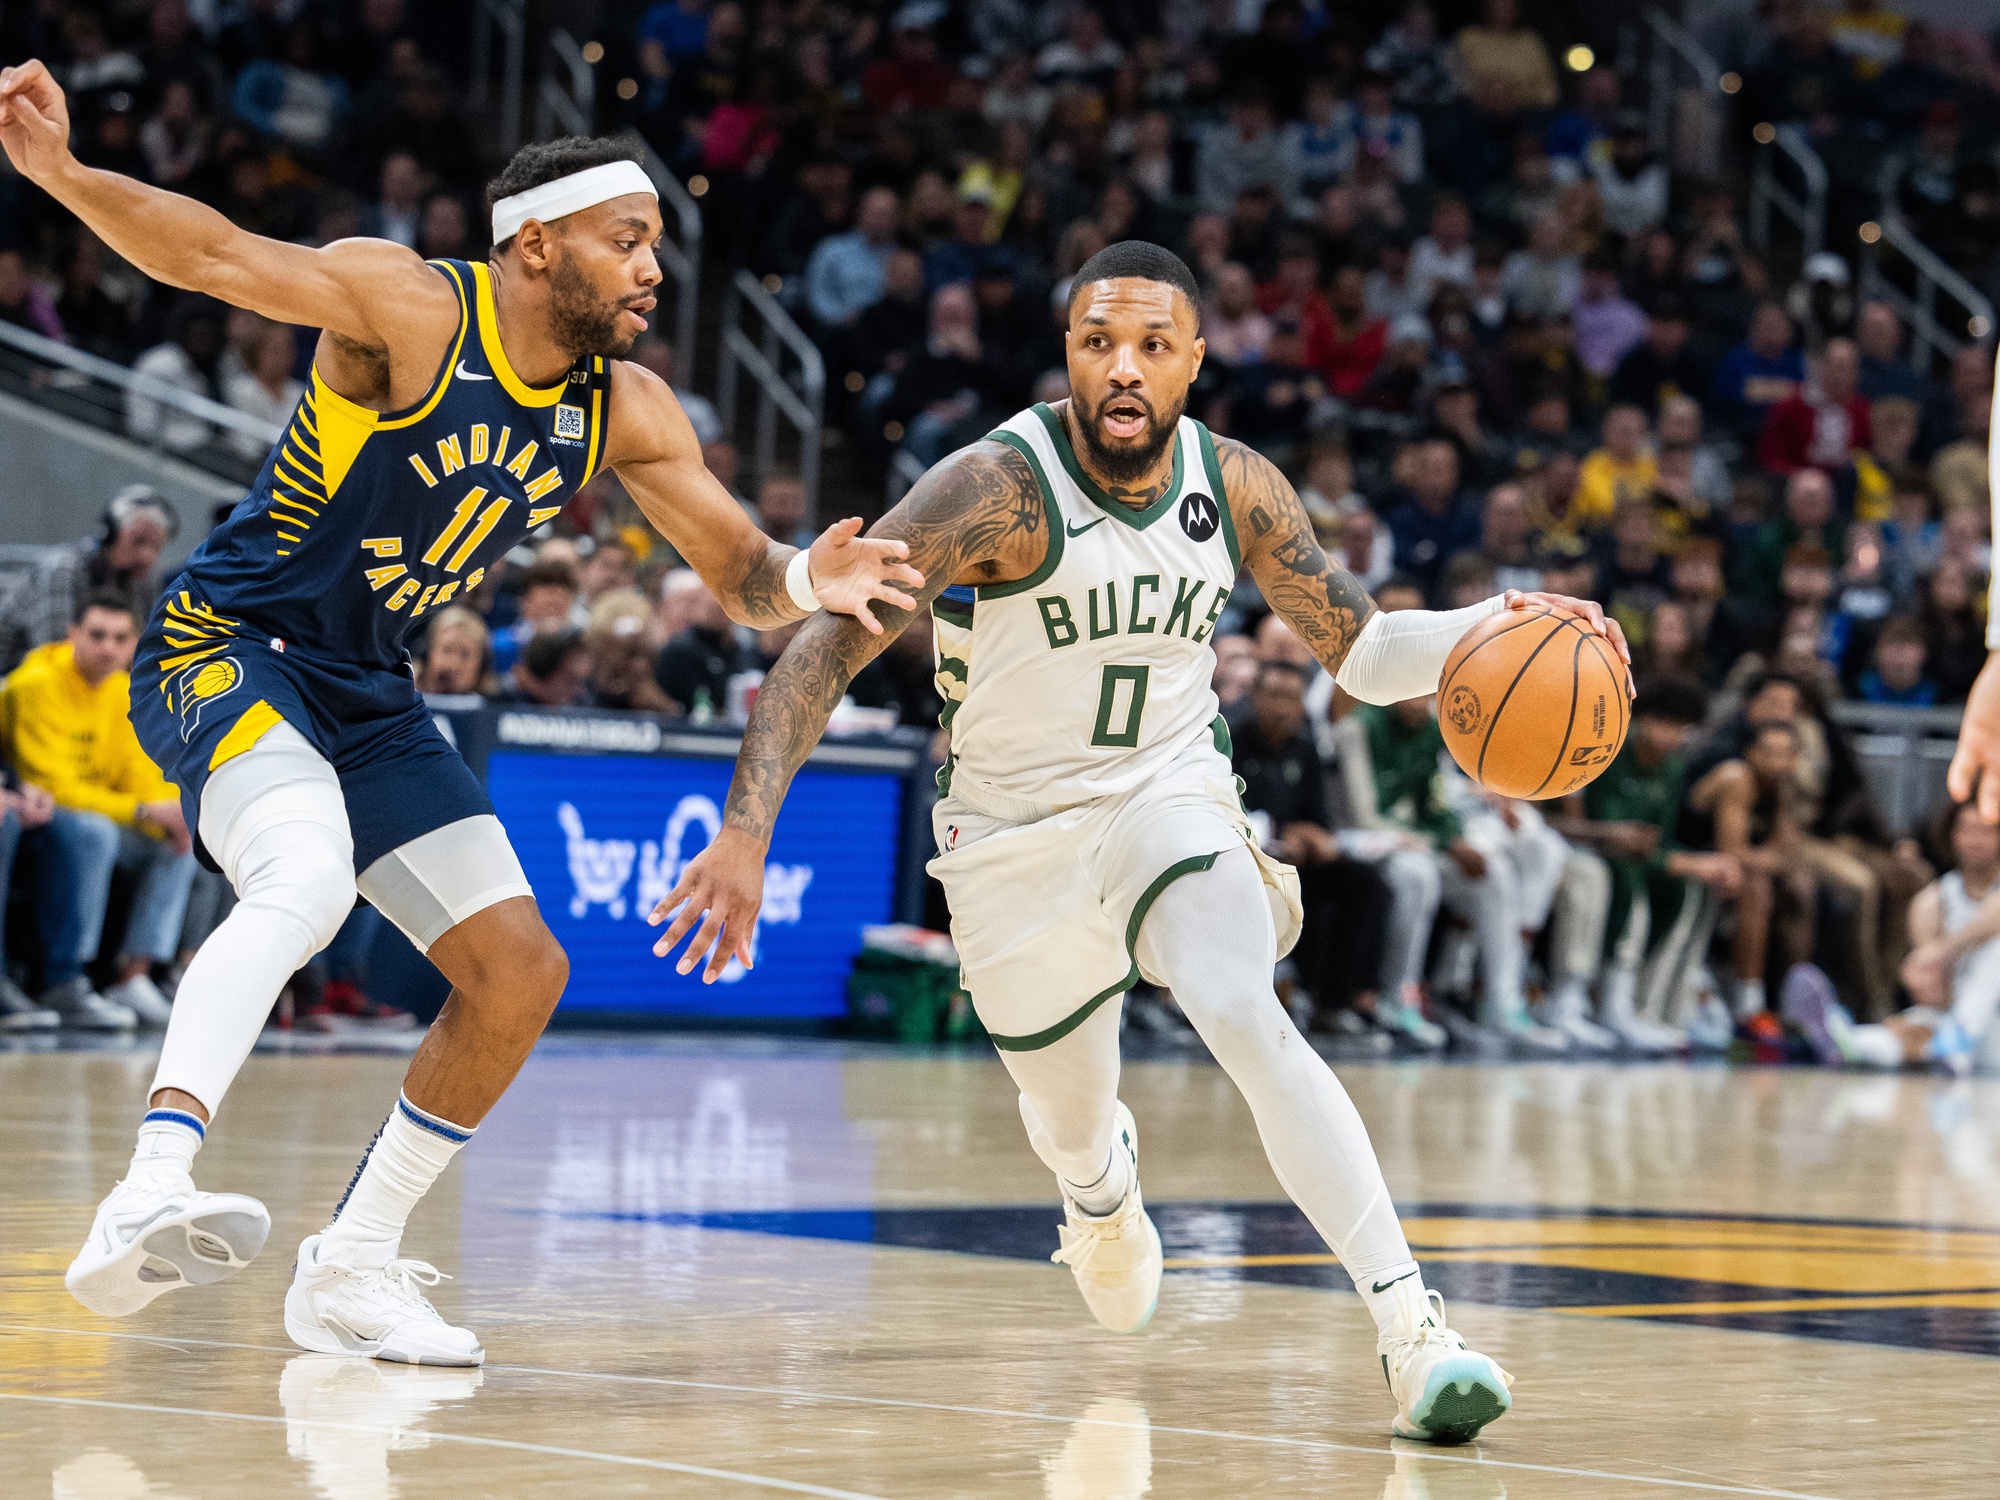 Jan 3, 2024; Indianapolis, Indiana, USA; Milwaukee Bucks guard Damian Lillard (0) dribbles the ball while Indiana Pacers forward Bruce Brown (11) defends in the first quarter at Gainbridge Fieldhouse. Mandatory Credit: Trevor Ruszkowski-USA TODAY Sports